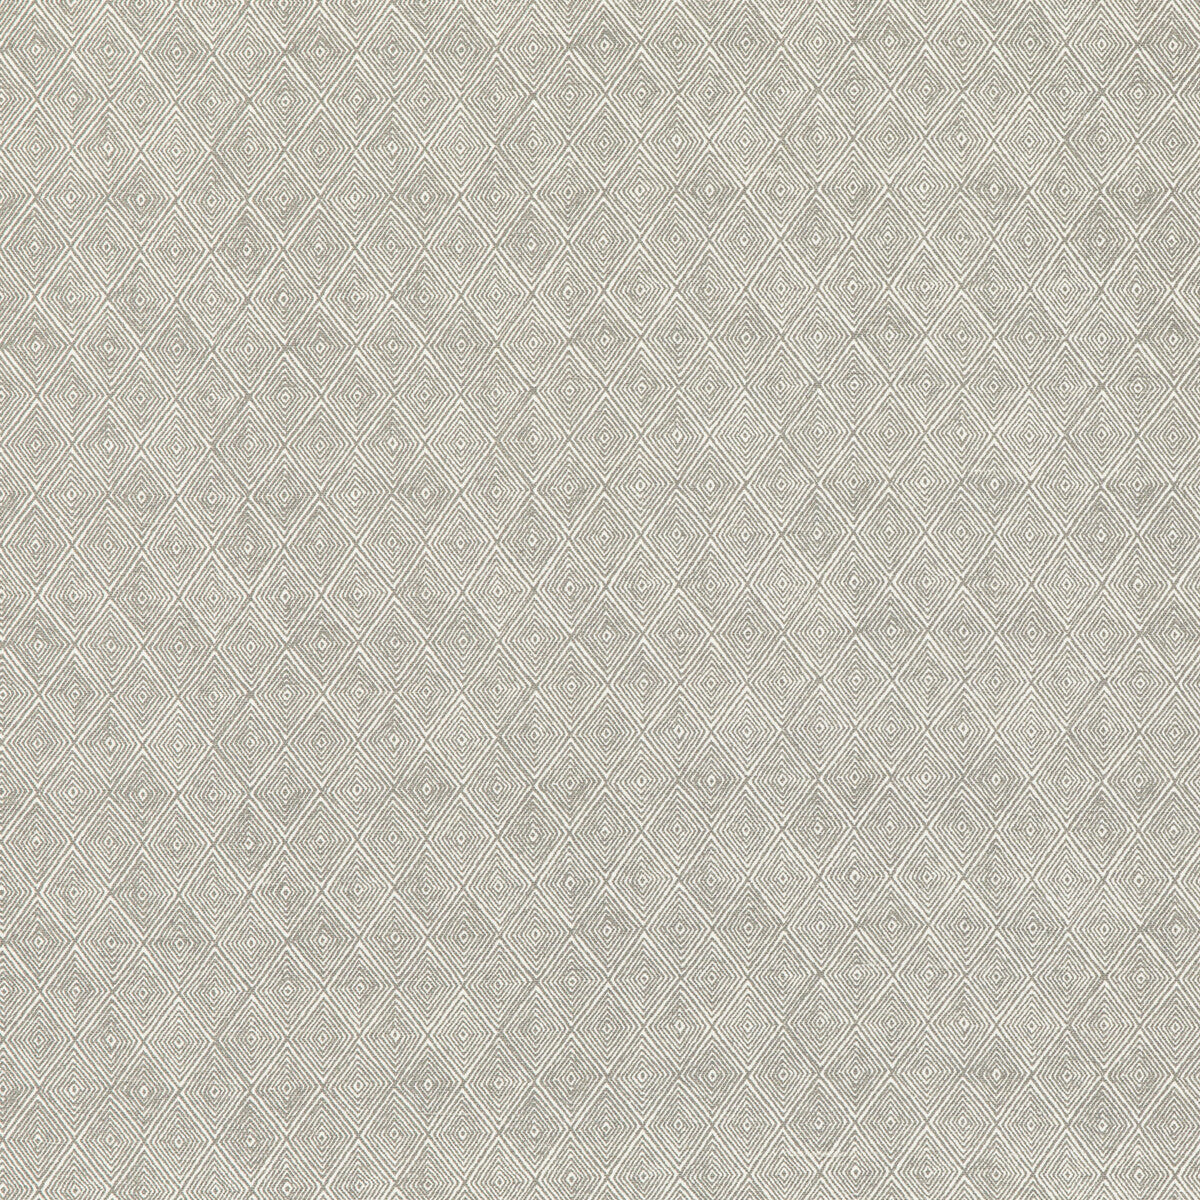 Boundary fabric in dove color - pattern ED75042.3.0 - by Threads in the Nala Prints collection